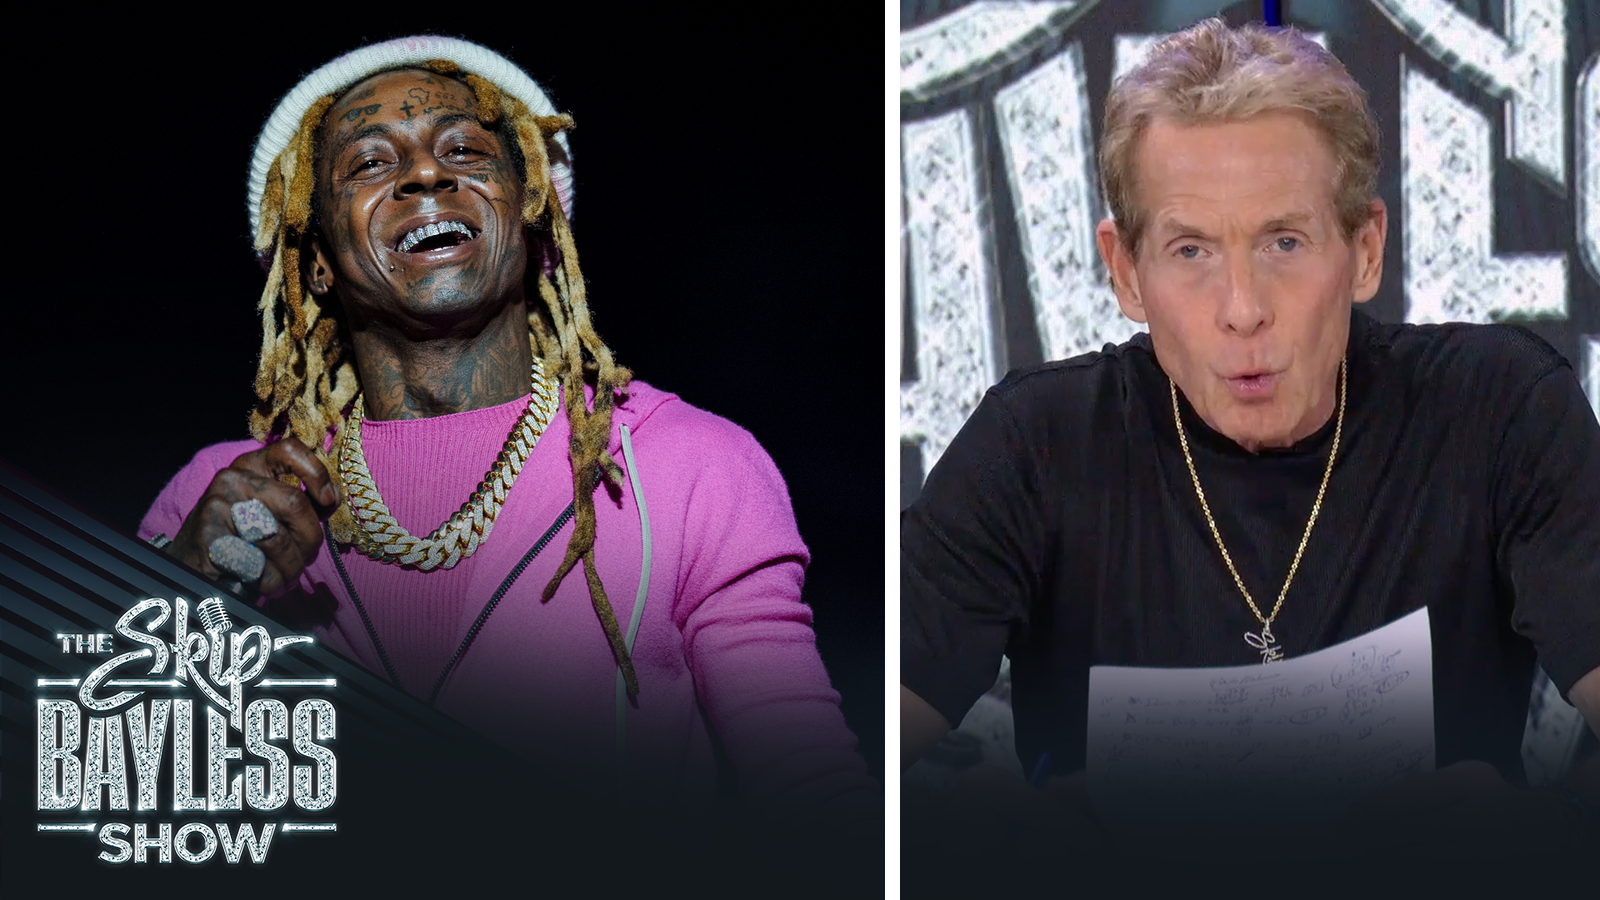 Skip Bayless appeared on Lil Wayne’s podcast, ‘Young Money Radio’